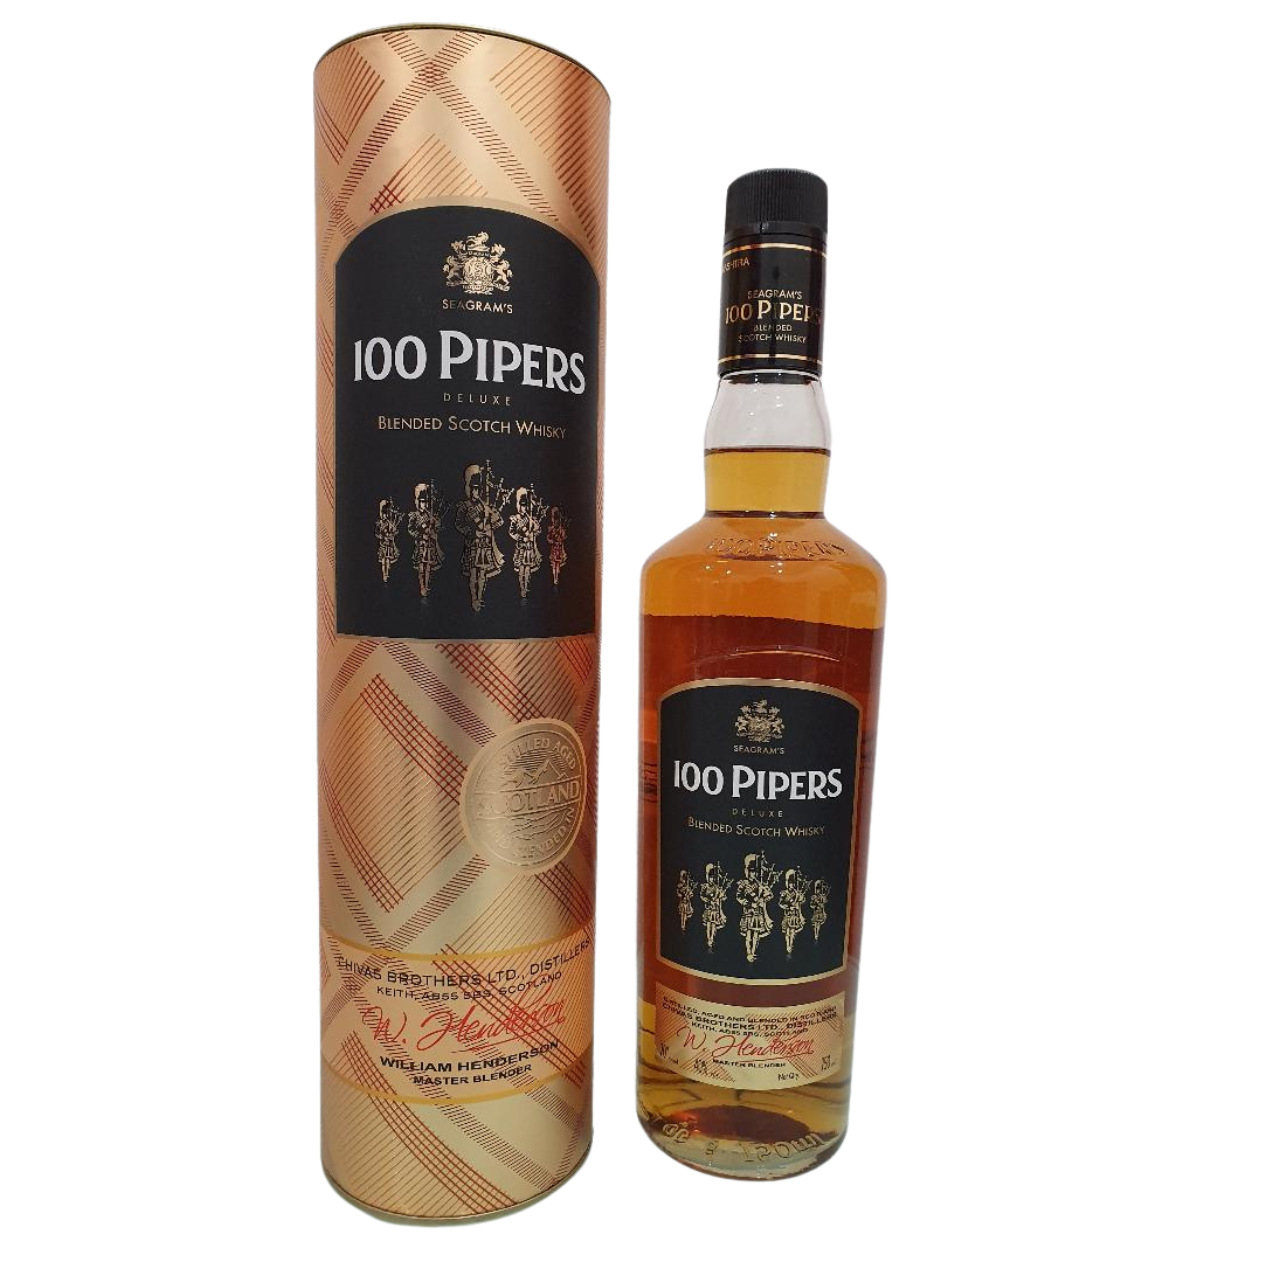 Seagram’s 100 Pipers Blended Scotch Whisky 750ml